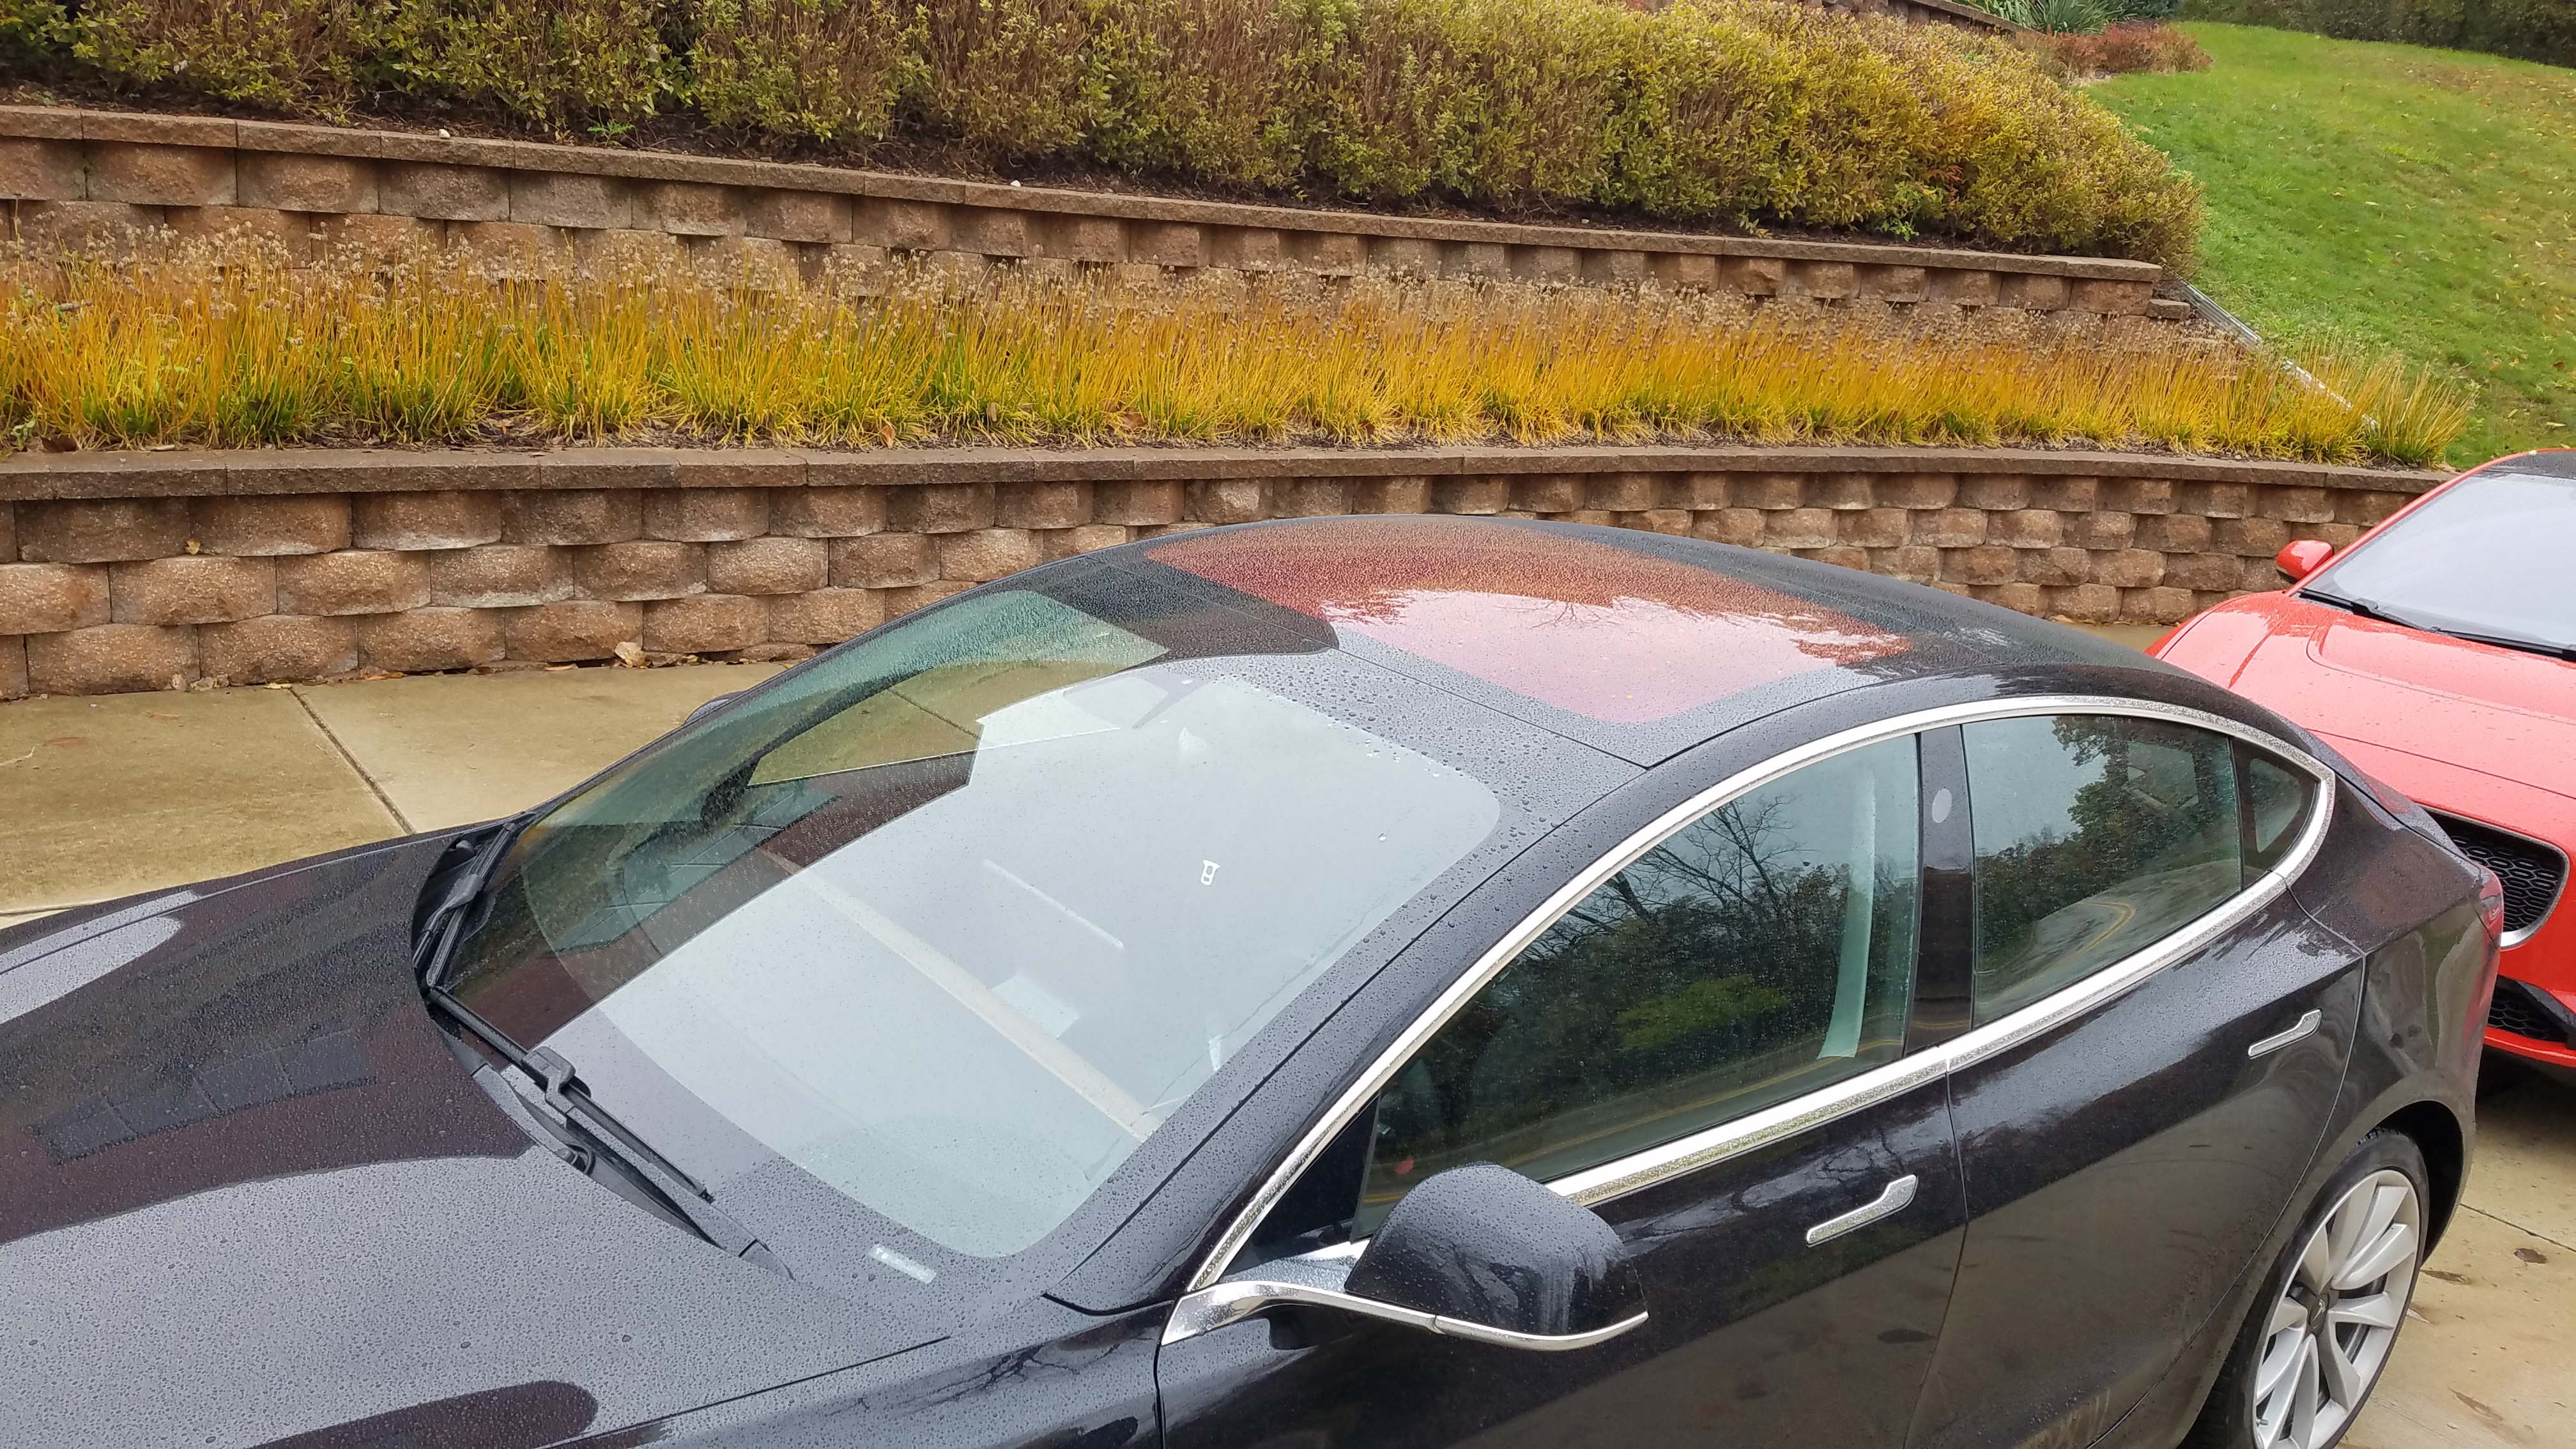 After a rain, the Tesla Model 3 roof will turn orange — thanks to a UV ray-reflector in the sunroof.